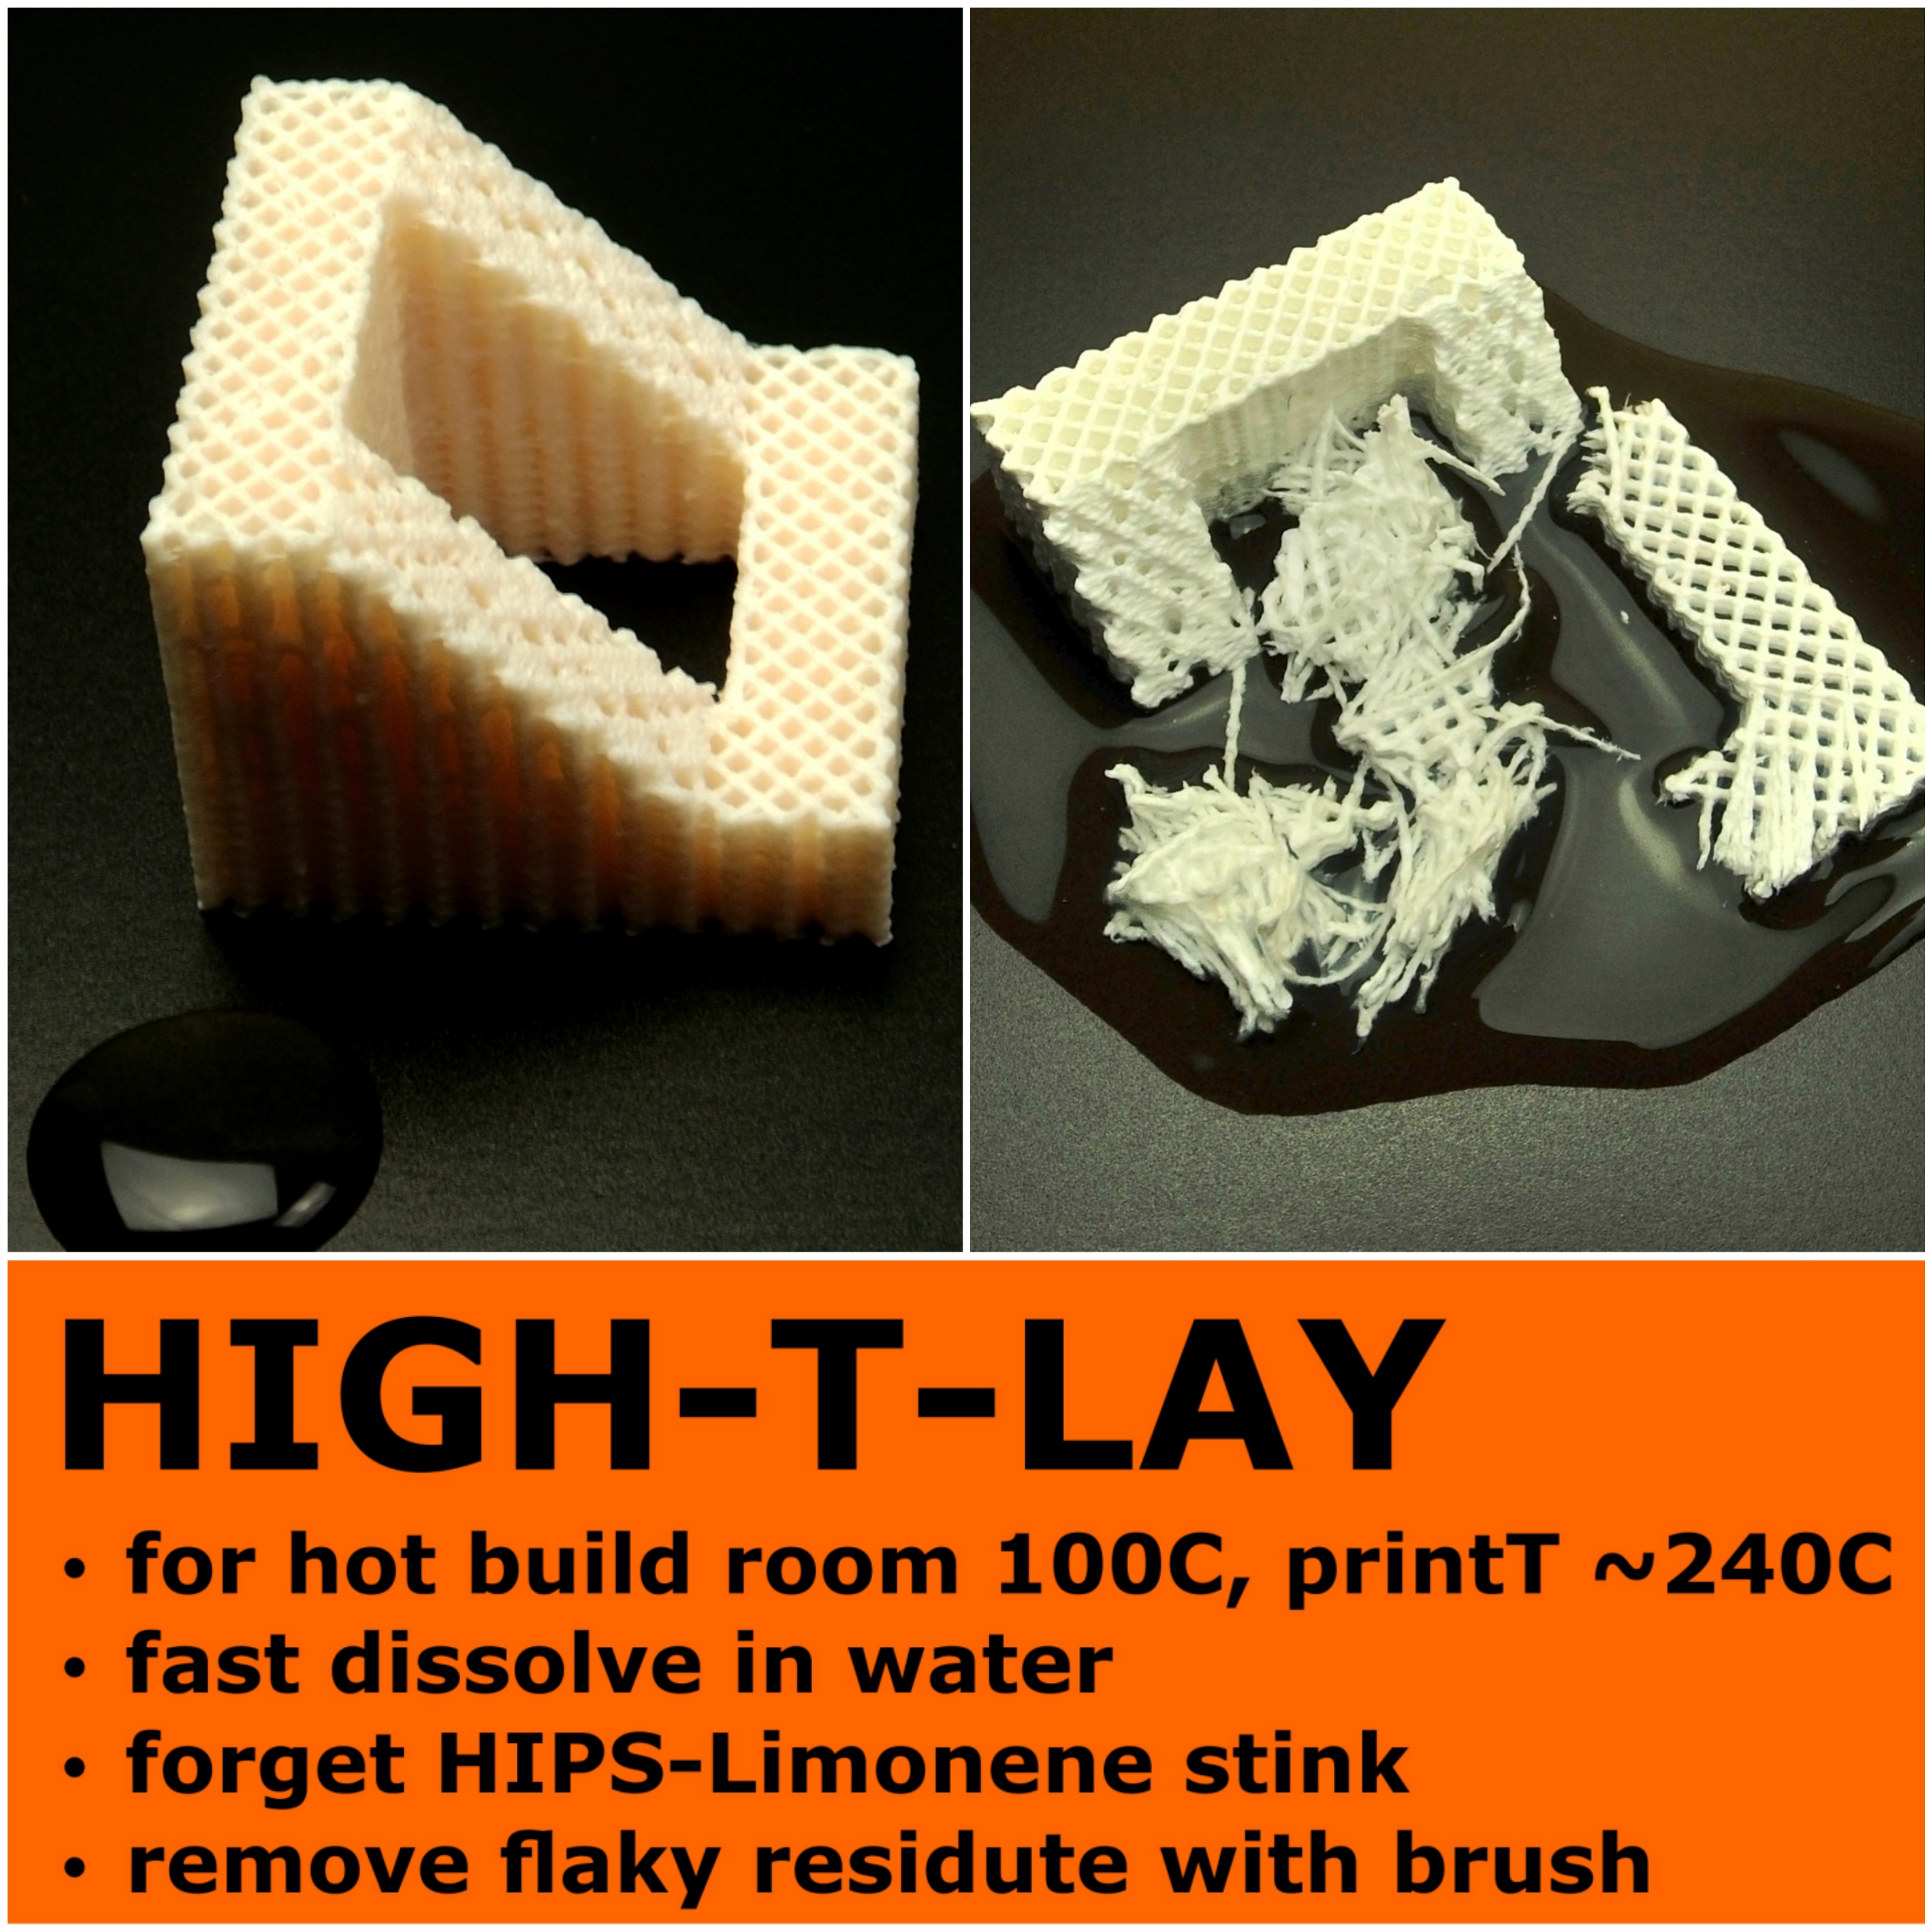 high-Tlay_filament_support_structures_kai_parthy